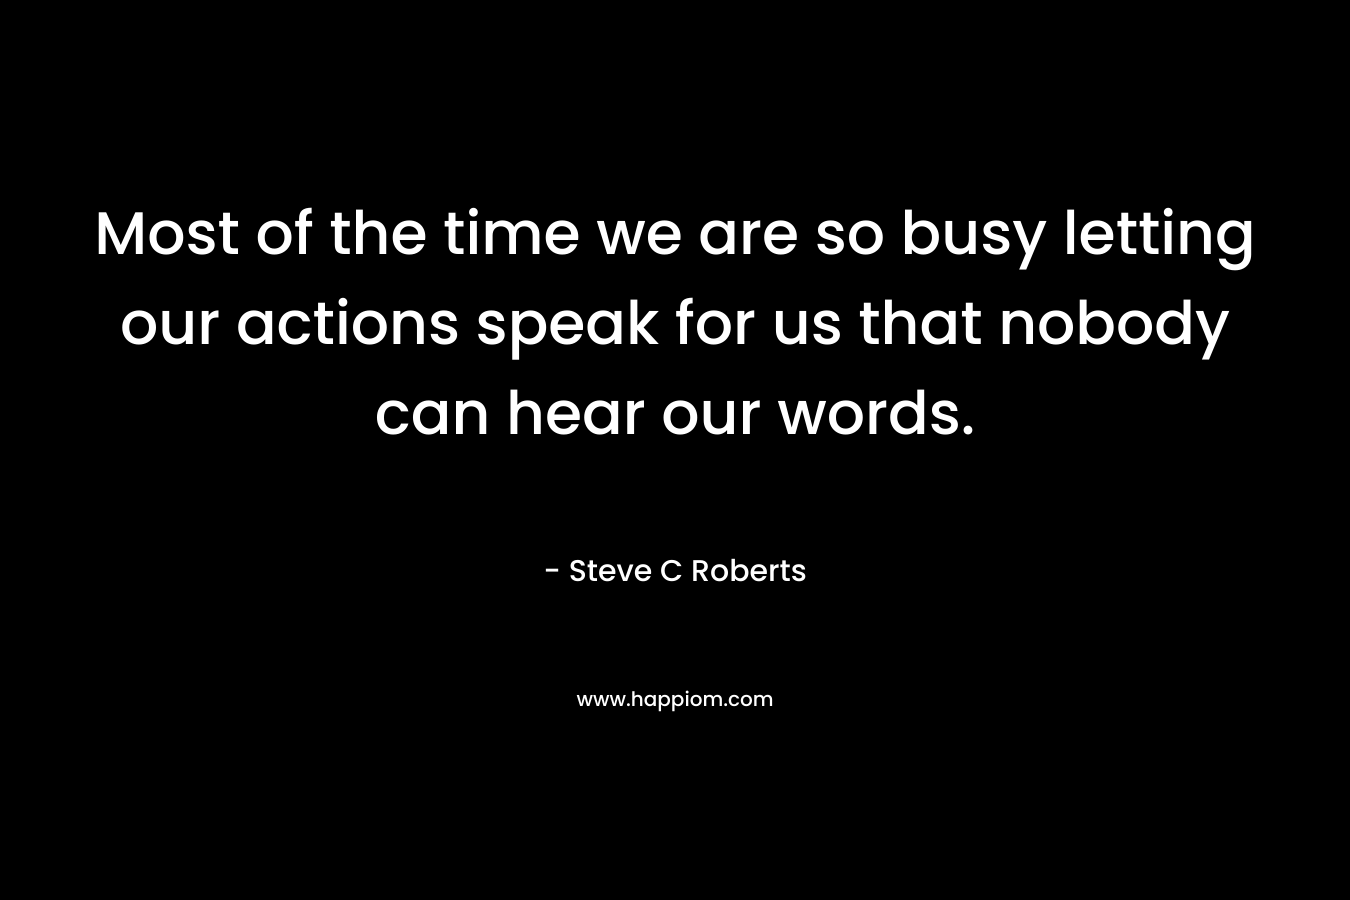 Most of the time we are so busy letting our actions speak for us that nobody can hear our words. – Steve C Roberts